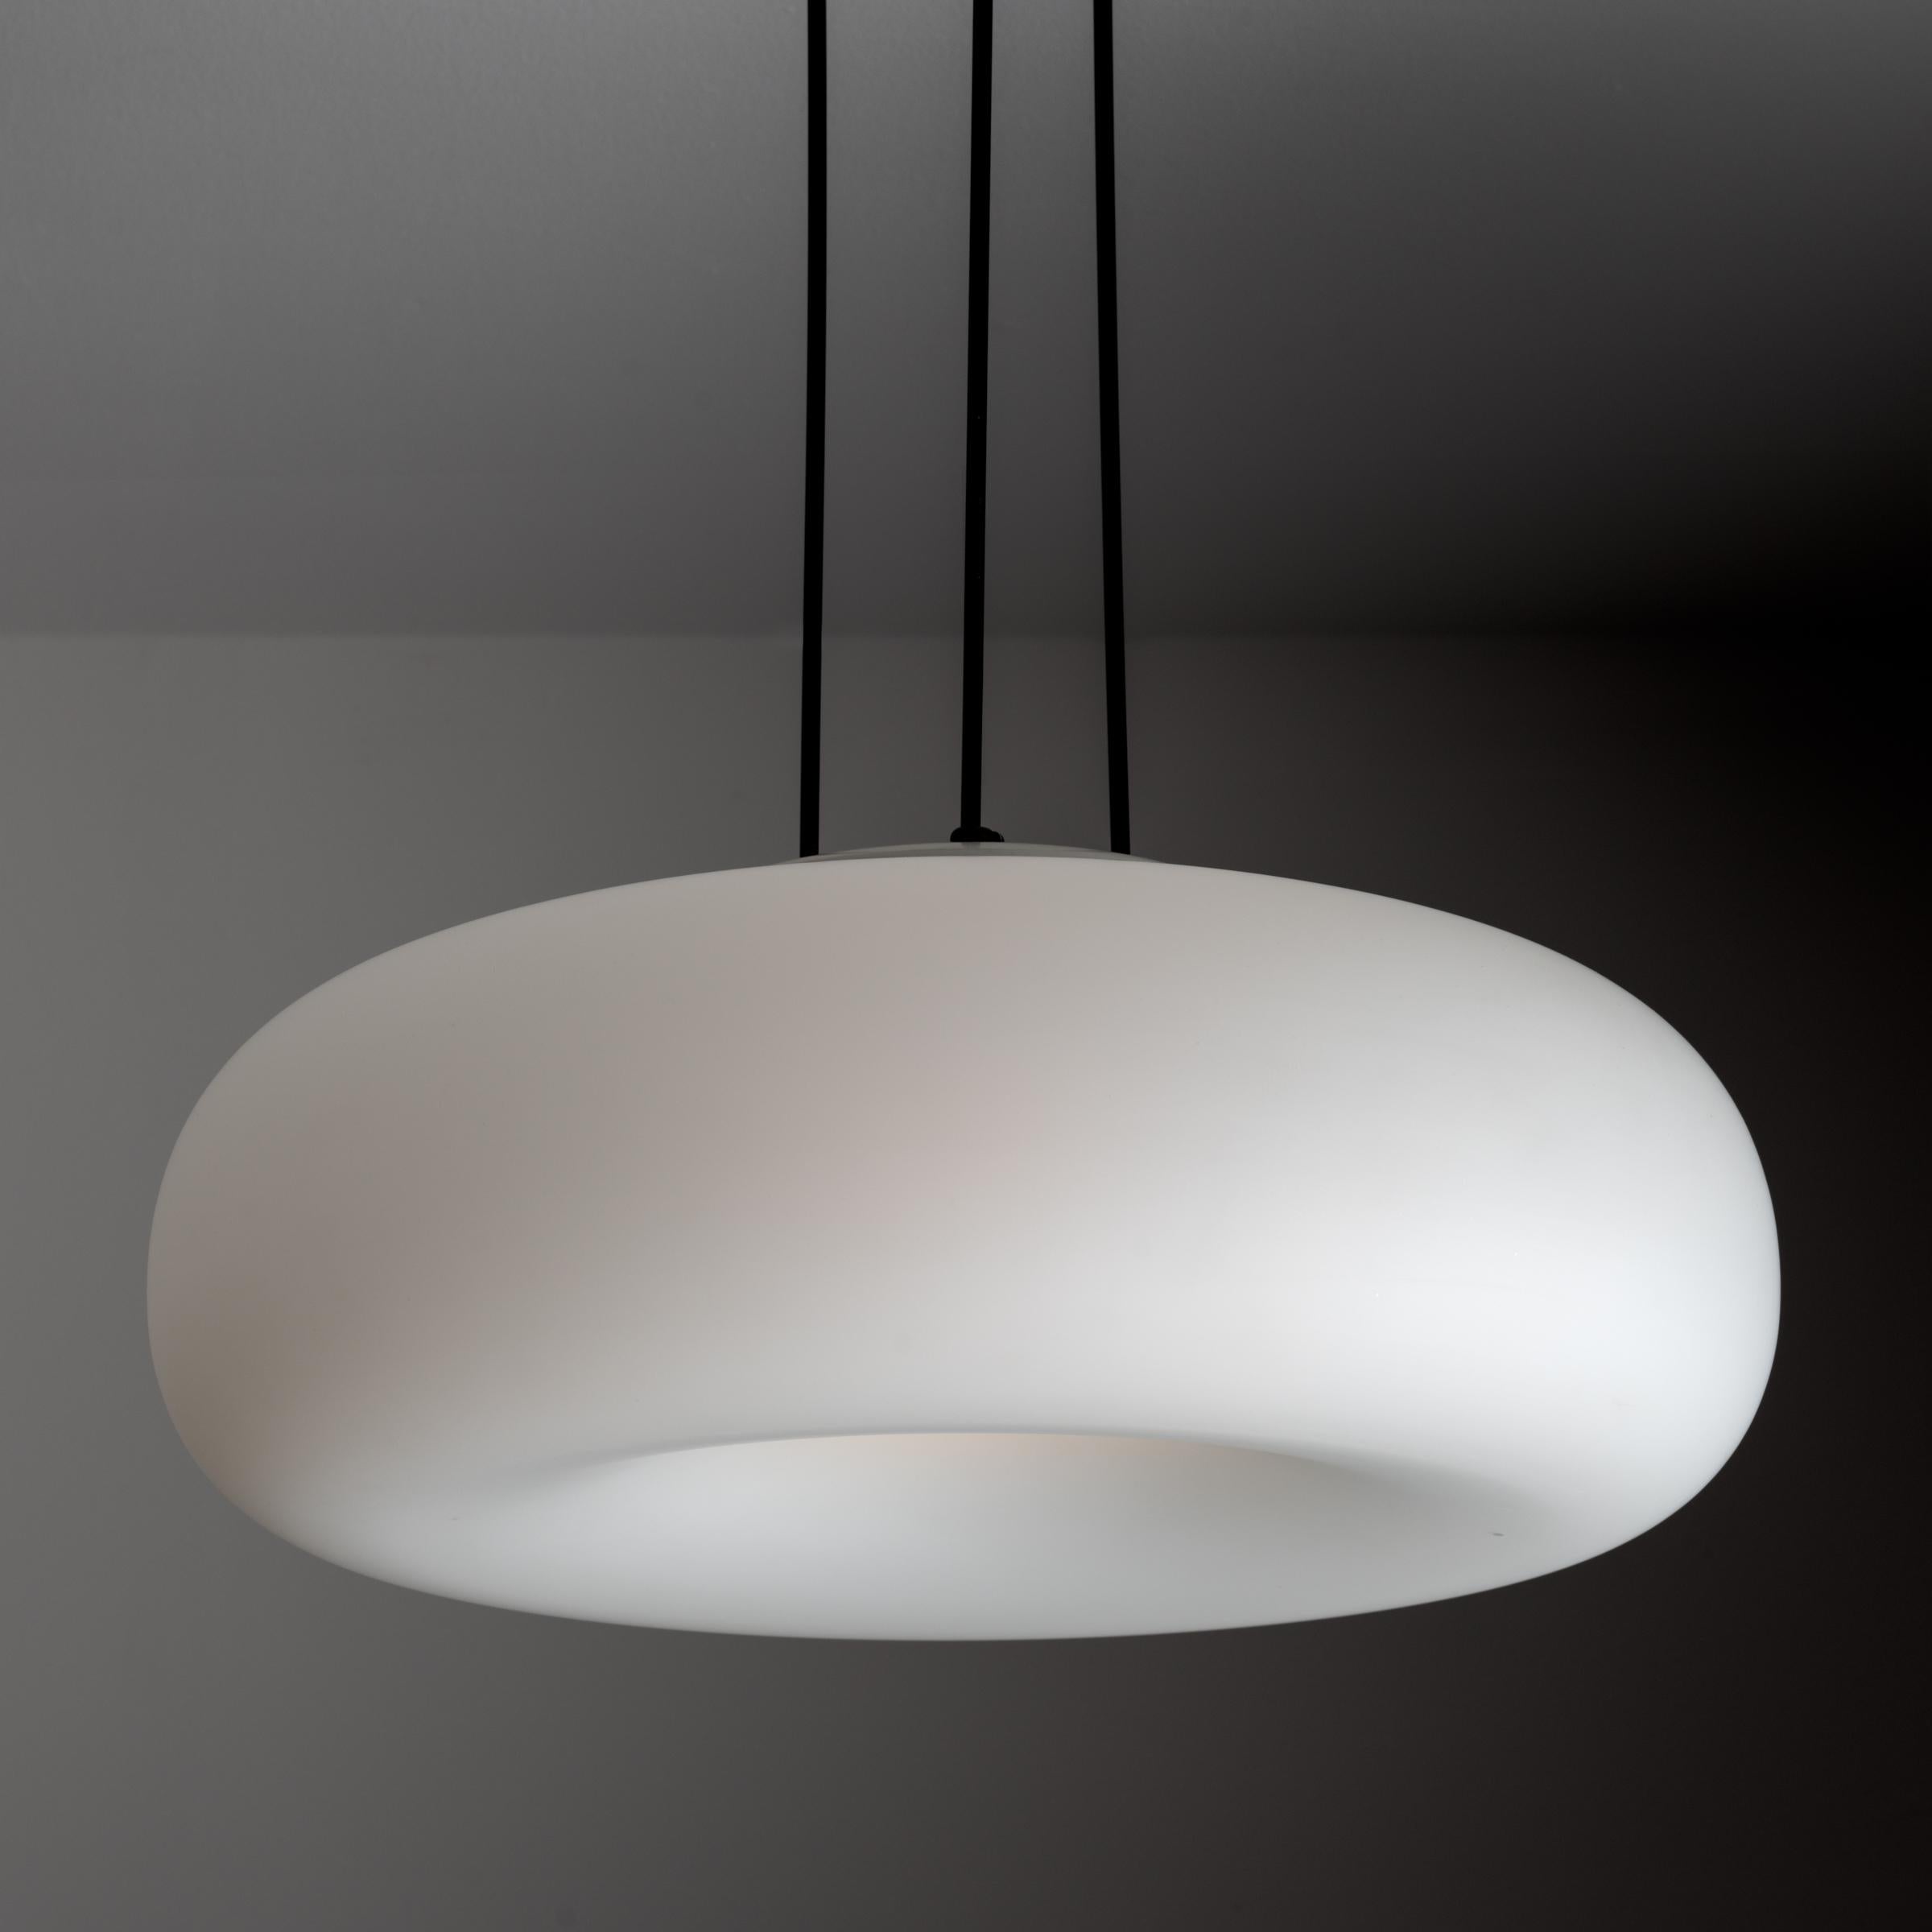 Mid-20th Century Model 2356 Ceiling Light by Max Ingrand for Fontana Arte